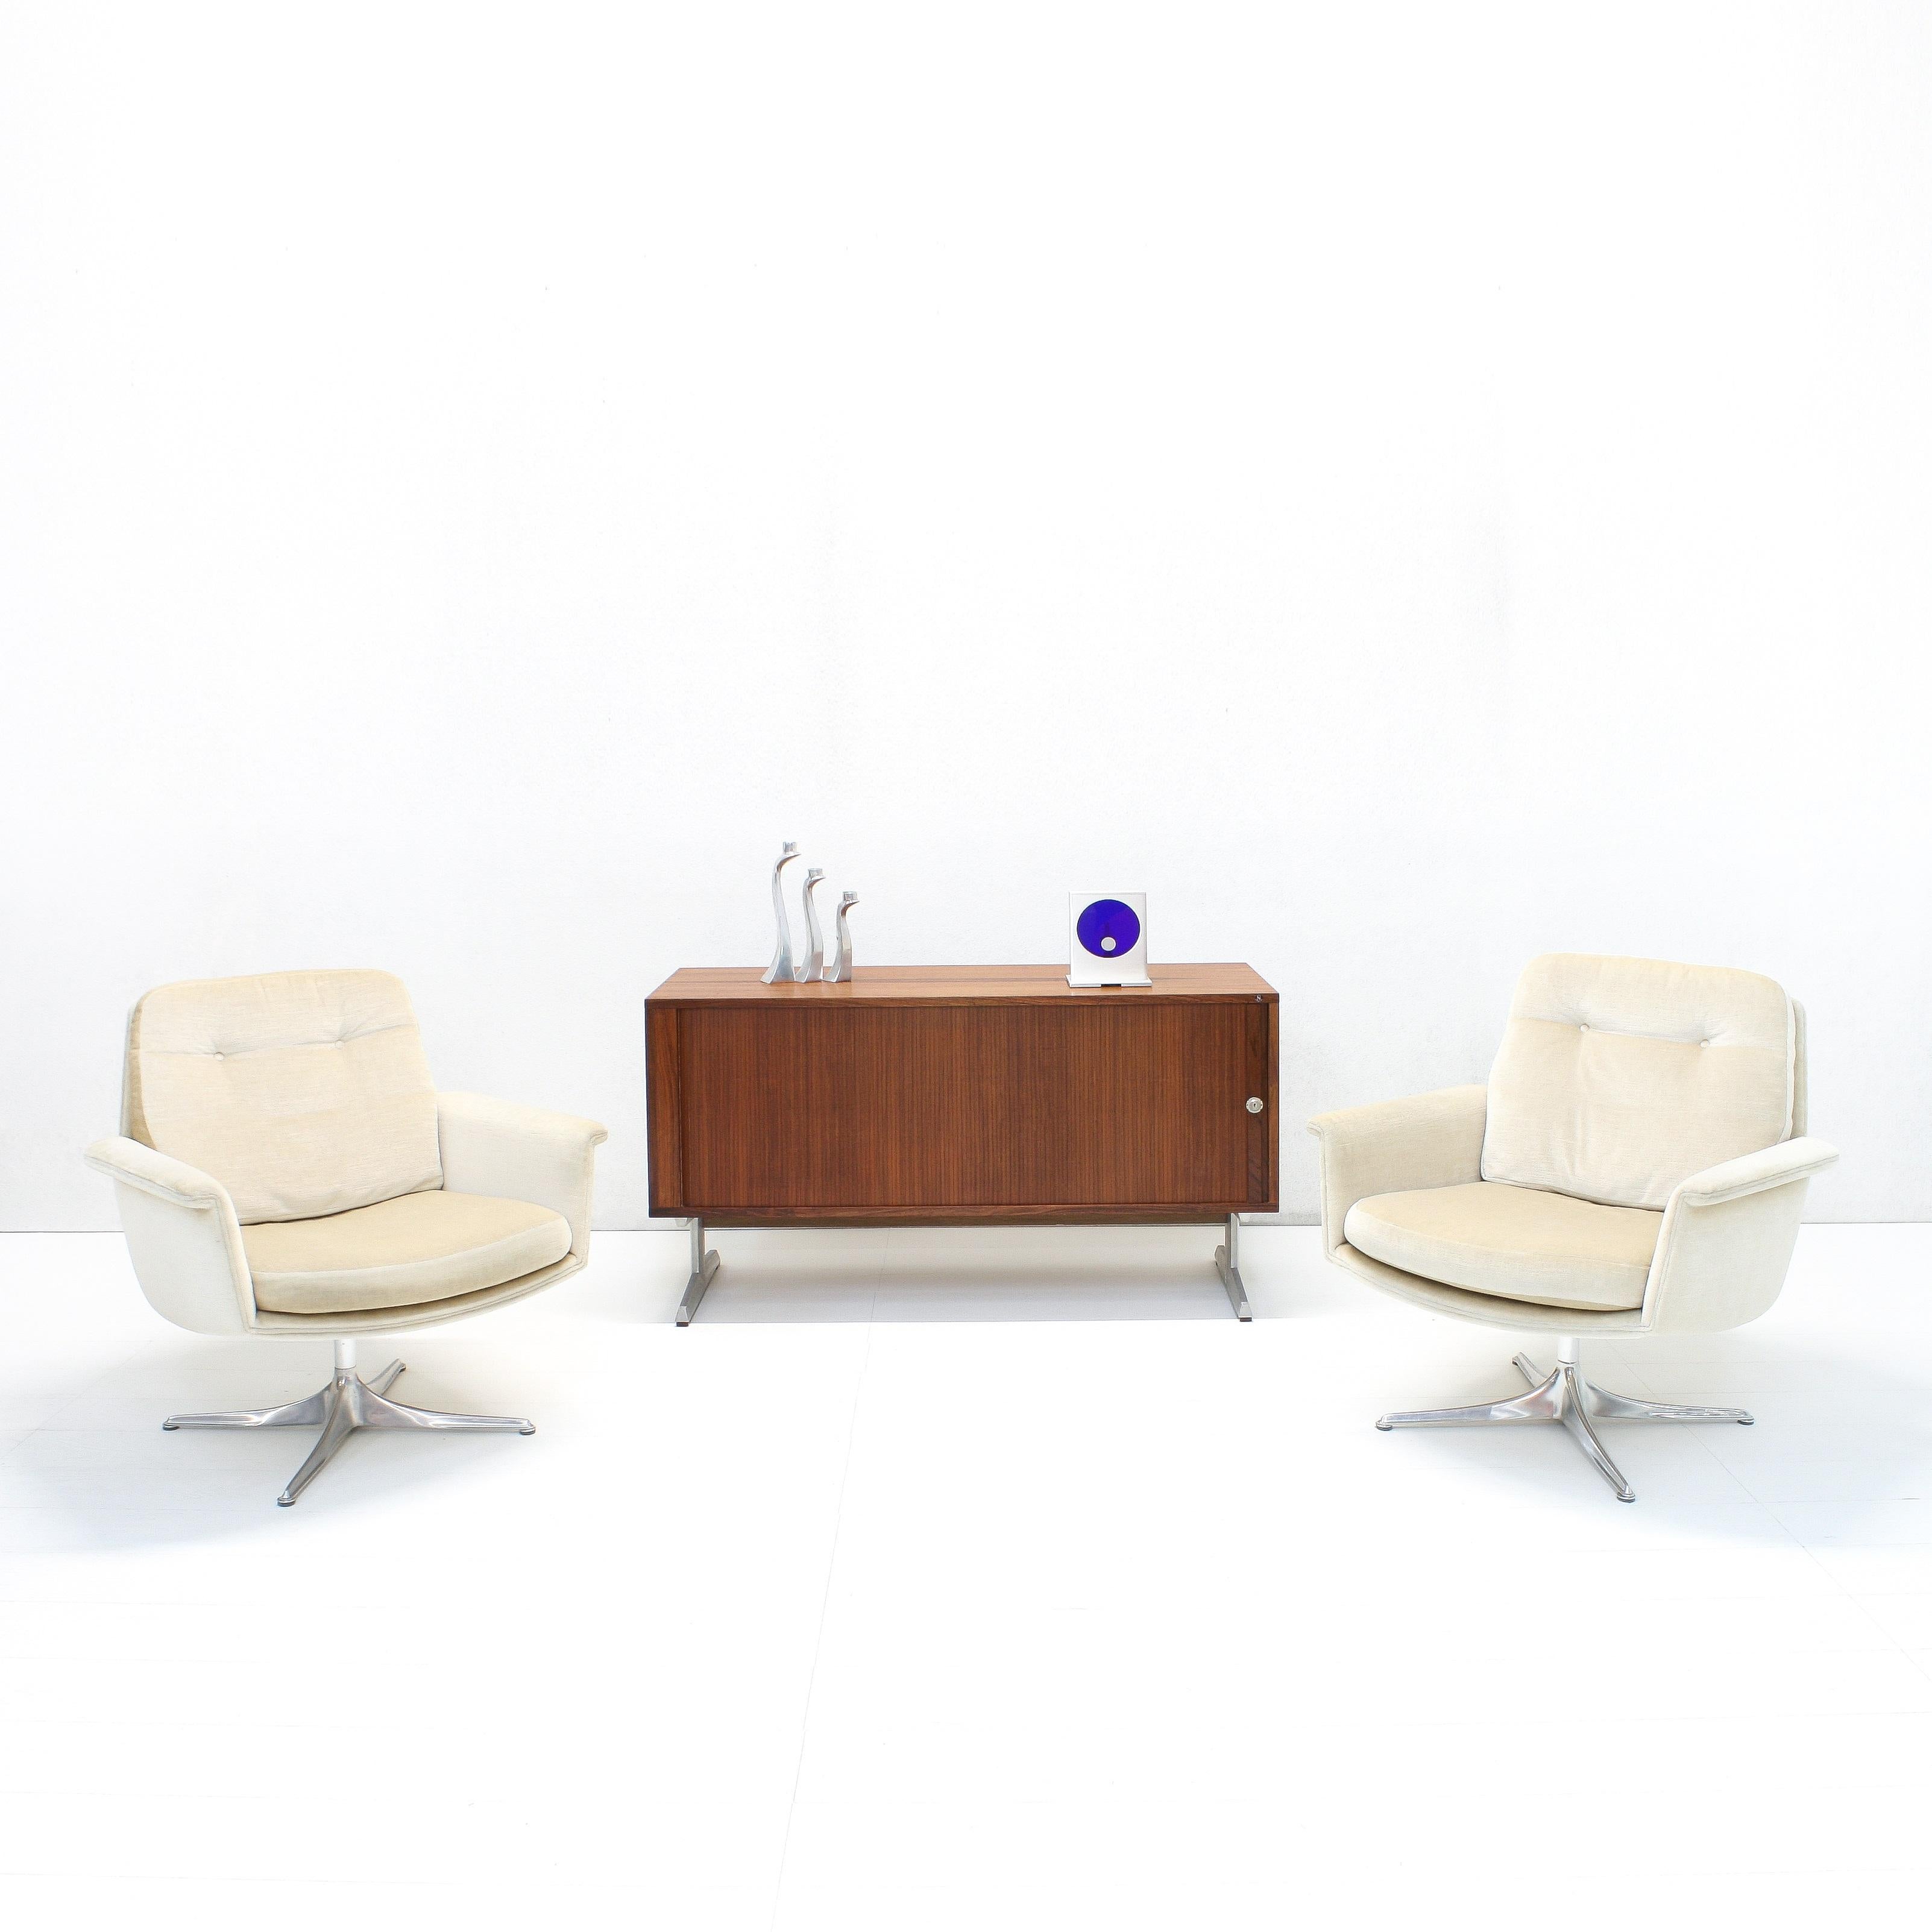 Wonderful pair of mid-century modern Sedia clubchairs designed by Horst Brüning for COR, Germany. Shell and loose cushions upholstered in soft cream velvet on a four-star aluminium base.